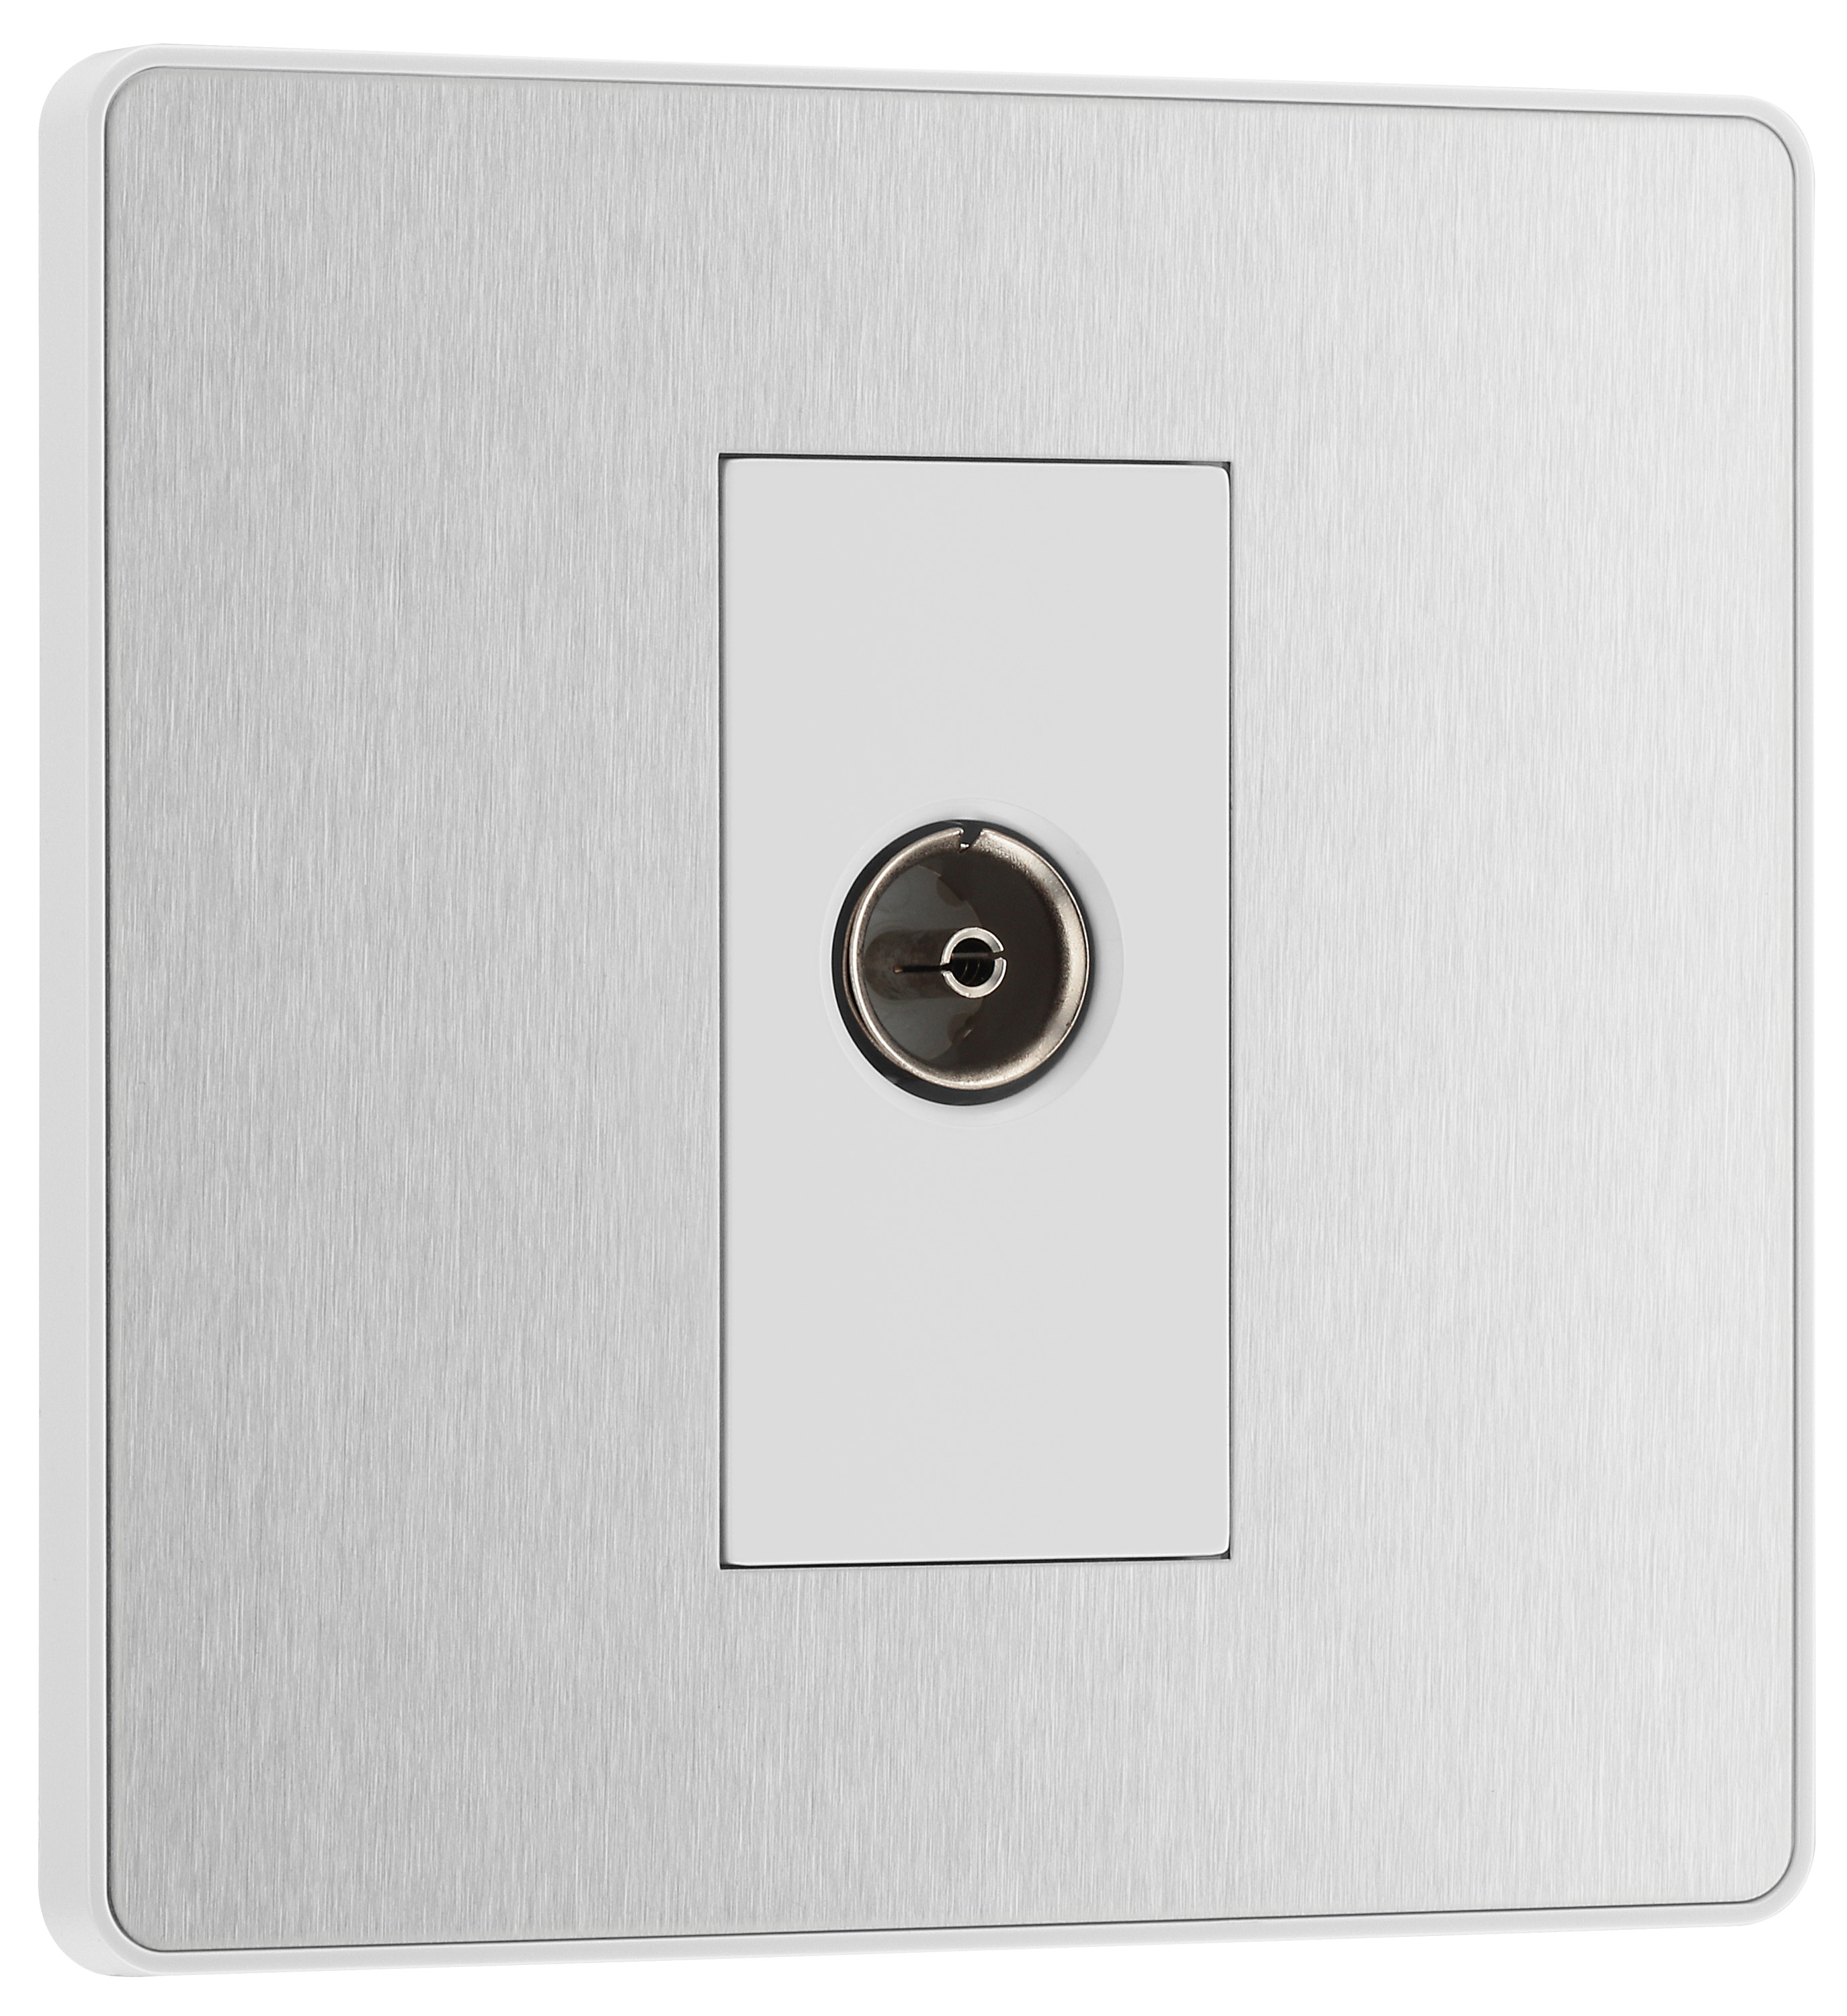 BG Evolve Brushed Steel Single Socket for Tv or Fm Co-Axial Aerial Connection